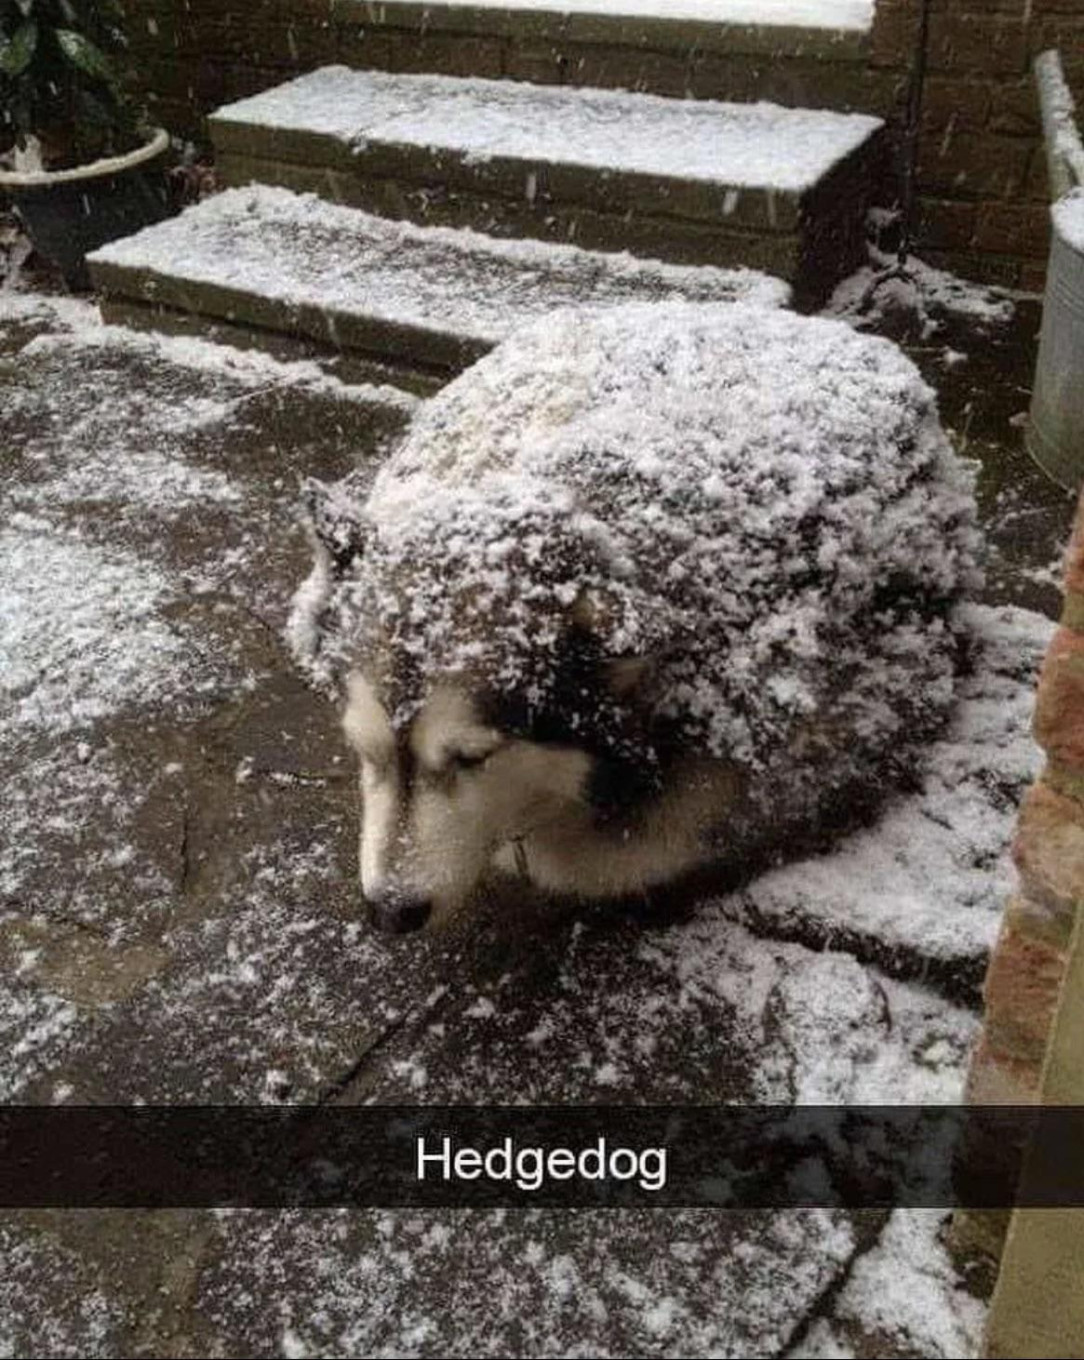 Hedgedog, make sure to approach quietly to not startle